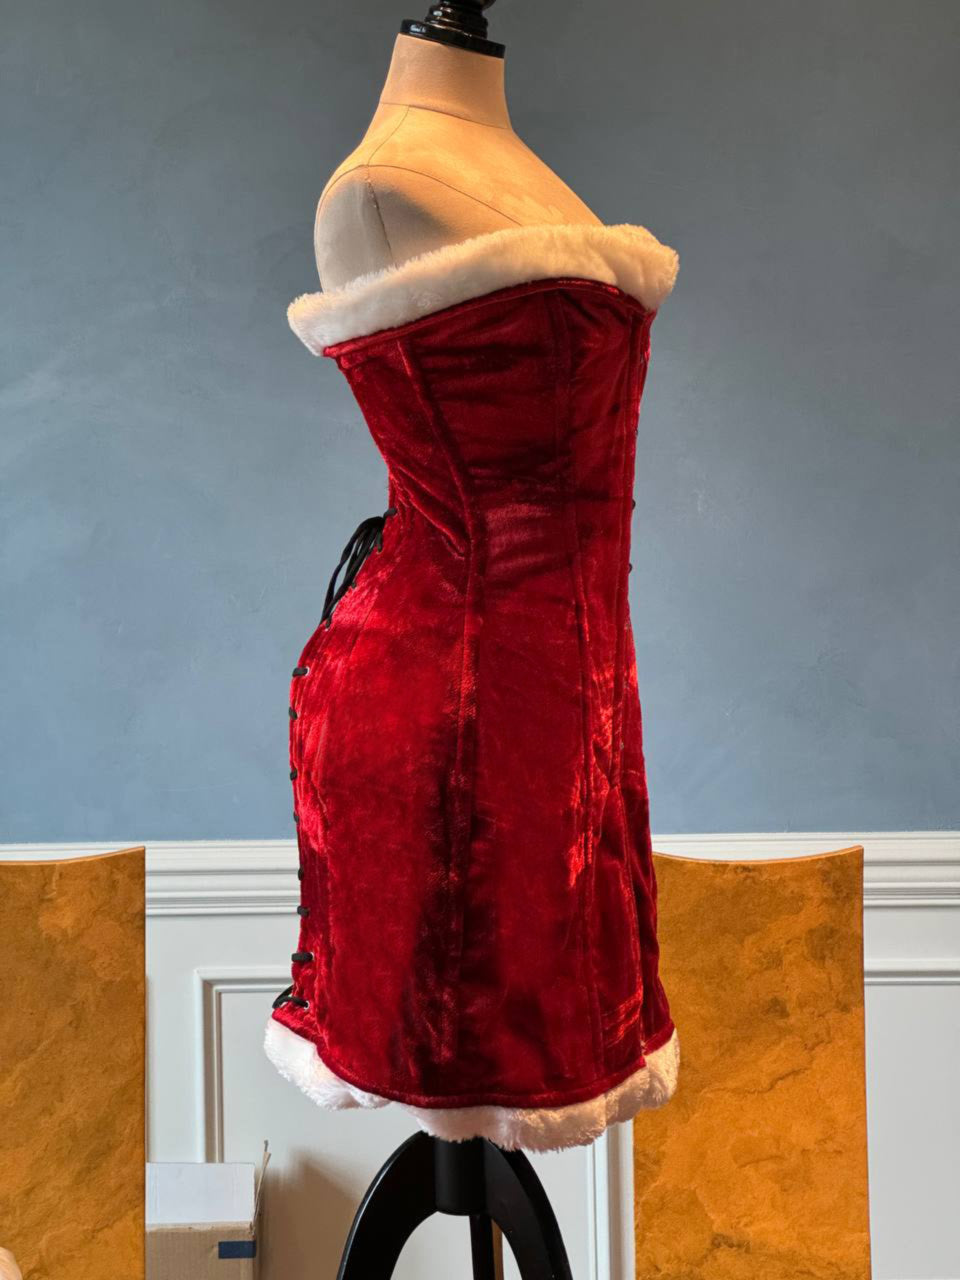 Authentic Santa corset dress with fluffy skirt, red Christmas